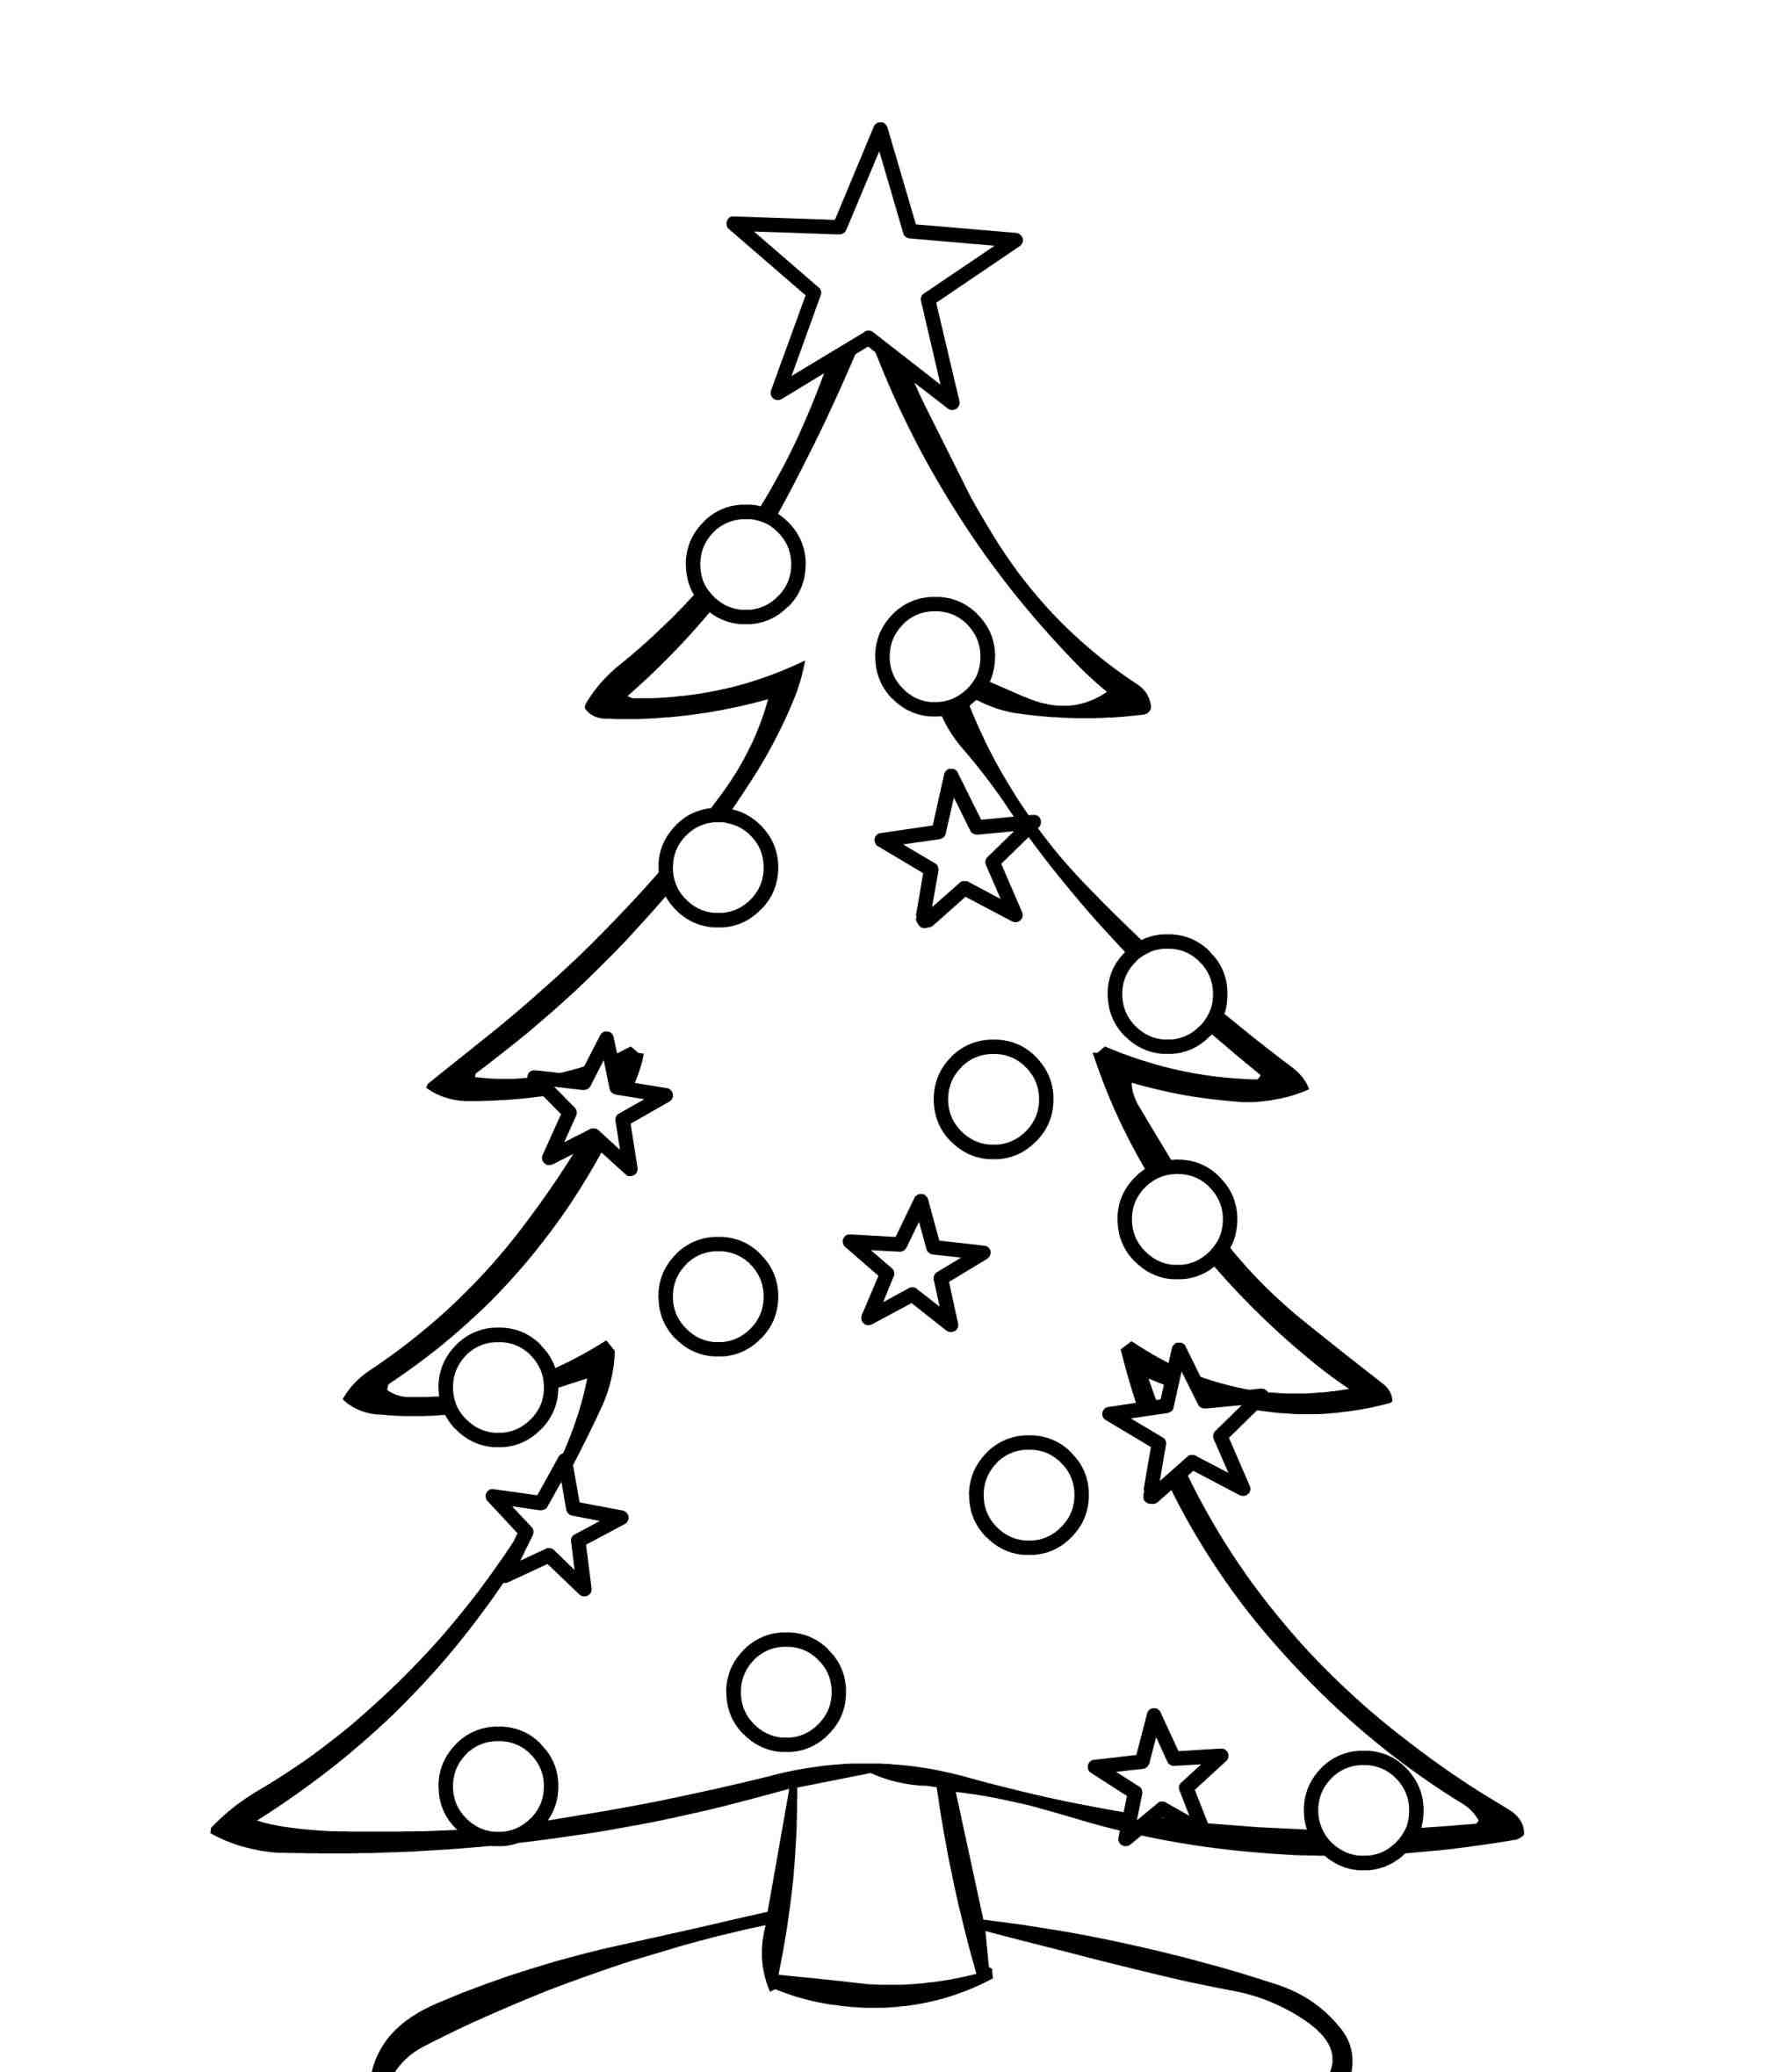 Christmas Tree Images Black And White | Free download on ClipArtMag